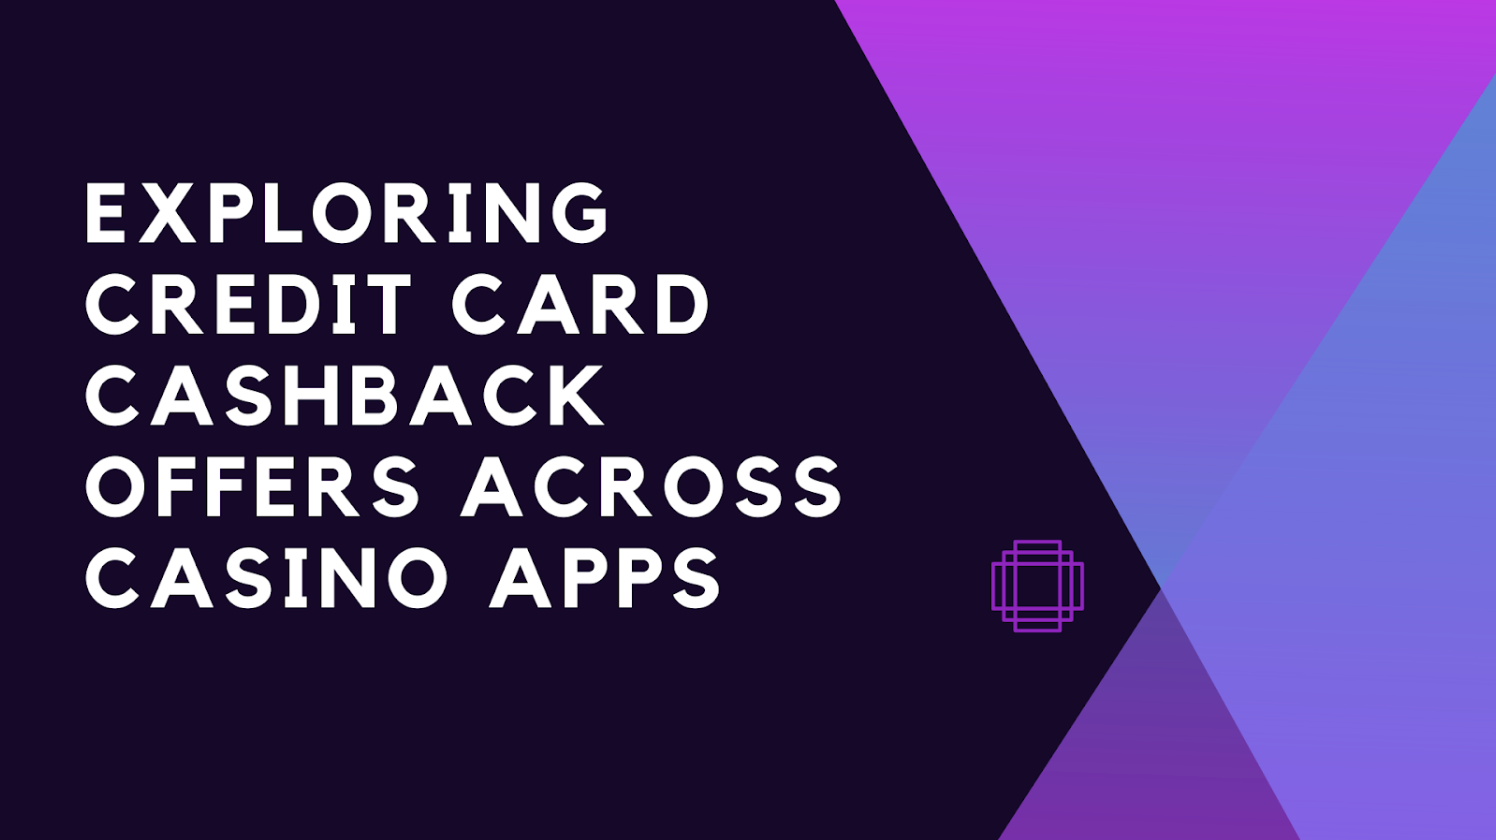 Exploring Credit Card Cashback Offers Across Casino Apps